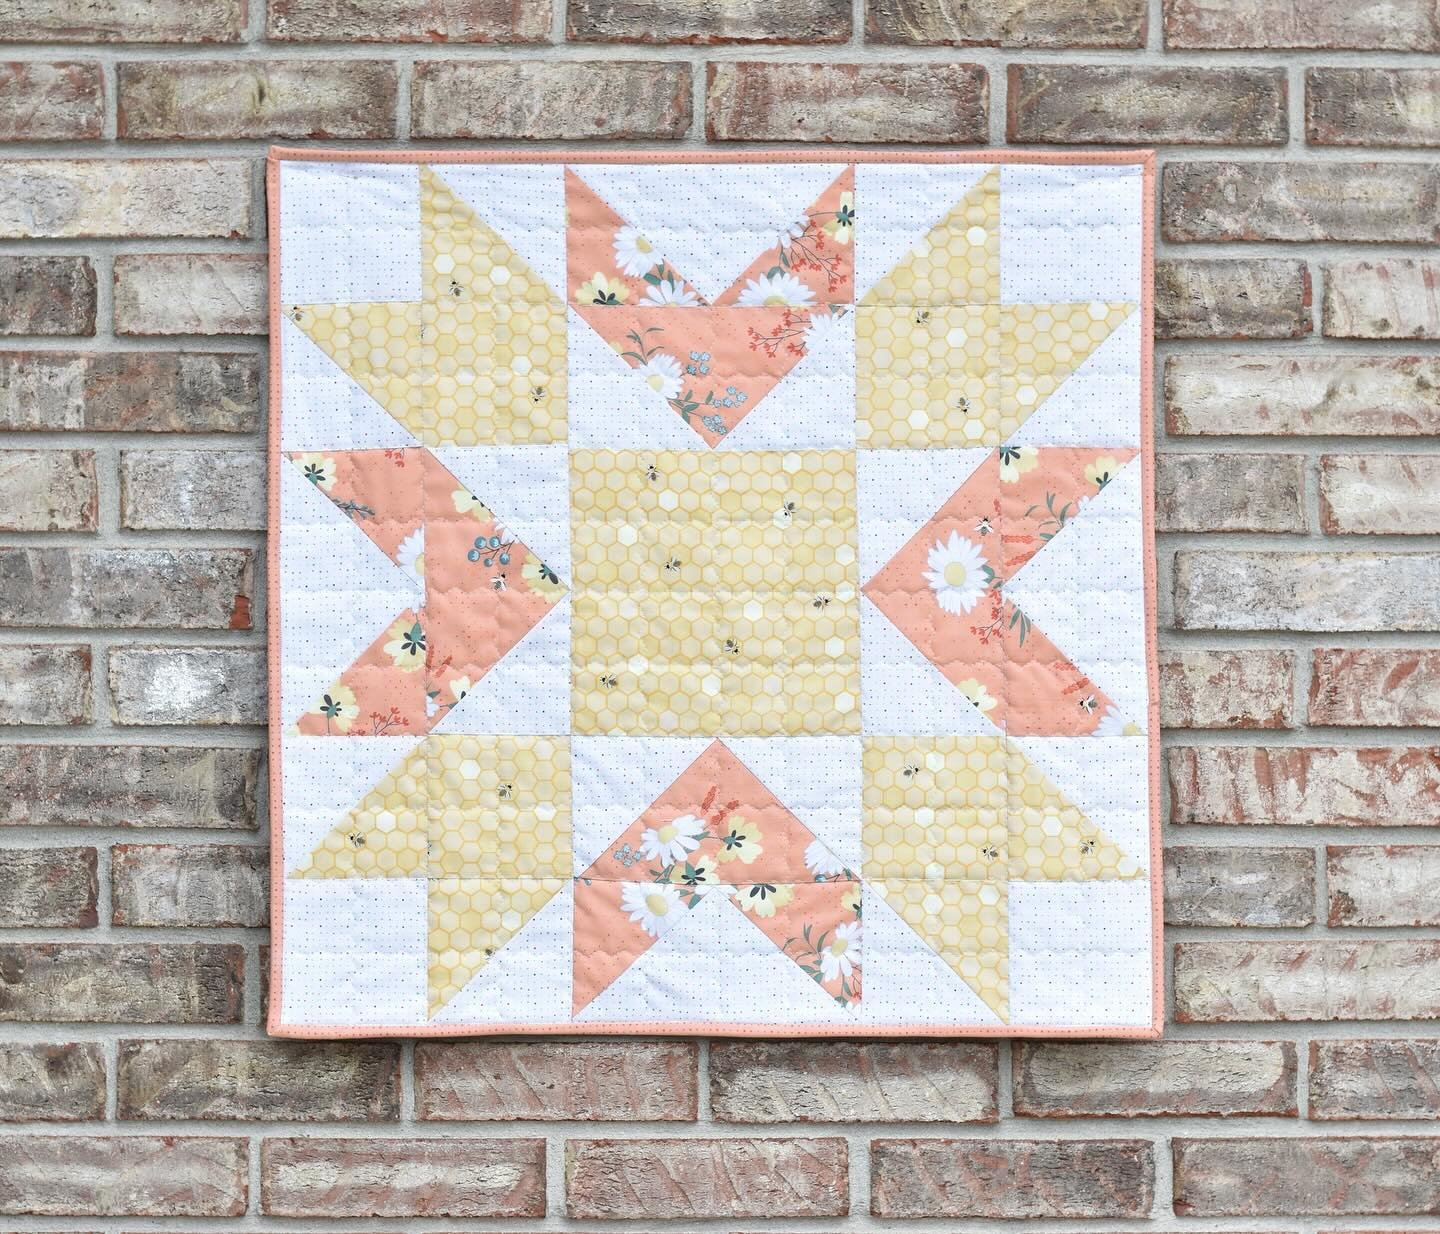 In case you missed it, this month&rsquo;s tutorial is the Star Flower mini quilt.  This 24&rdquo; block looks fantastic alone or make more to create a bigger quilt! (➡️ to see close up image) Head to my blog for all of the details.

Fabric: Sunshine 